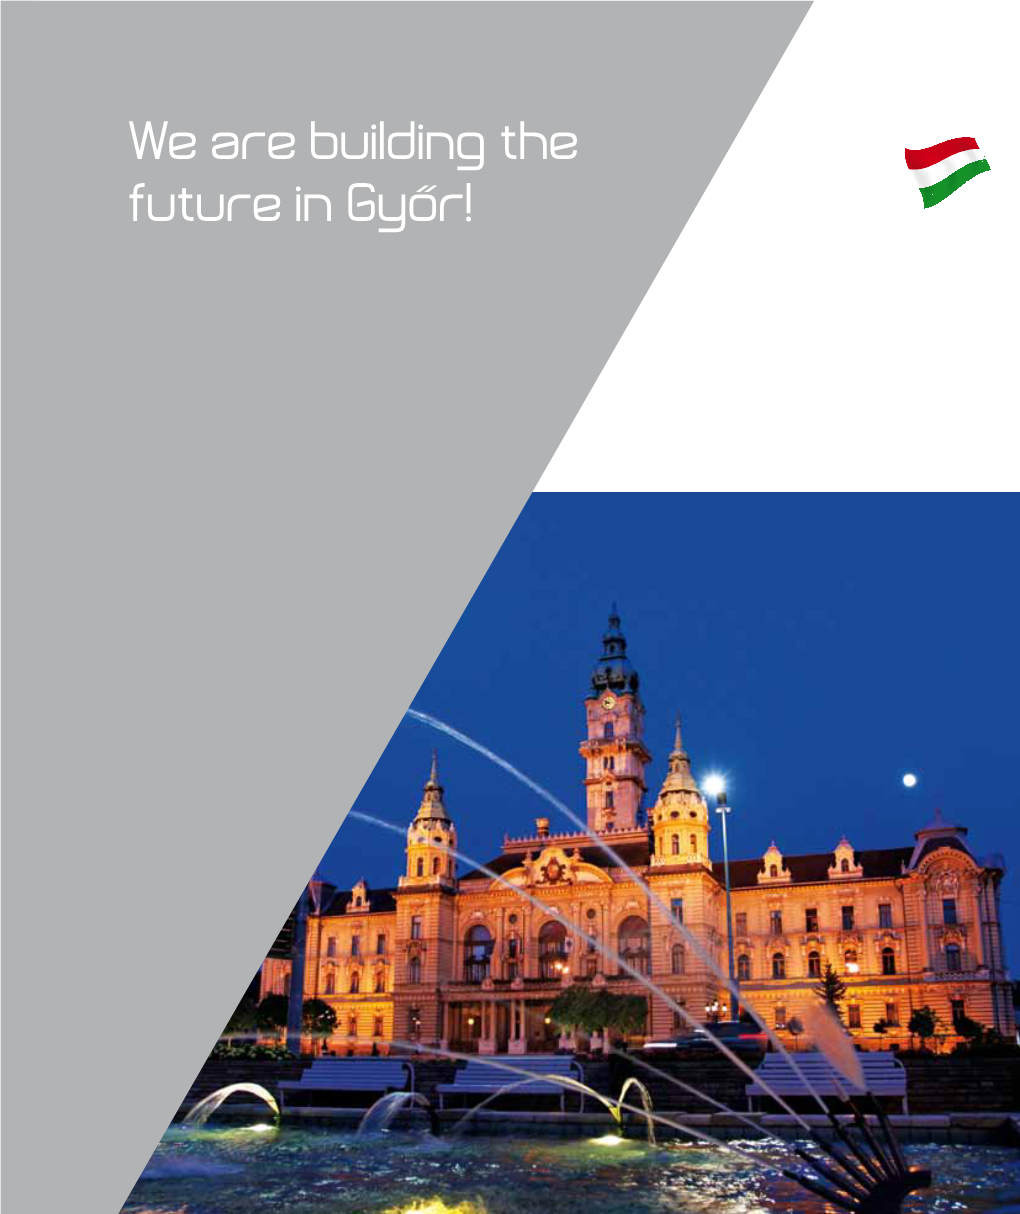 We Are Building the Future in Győr!